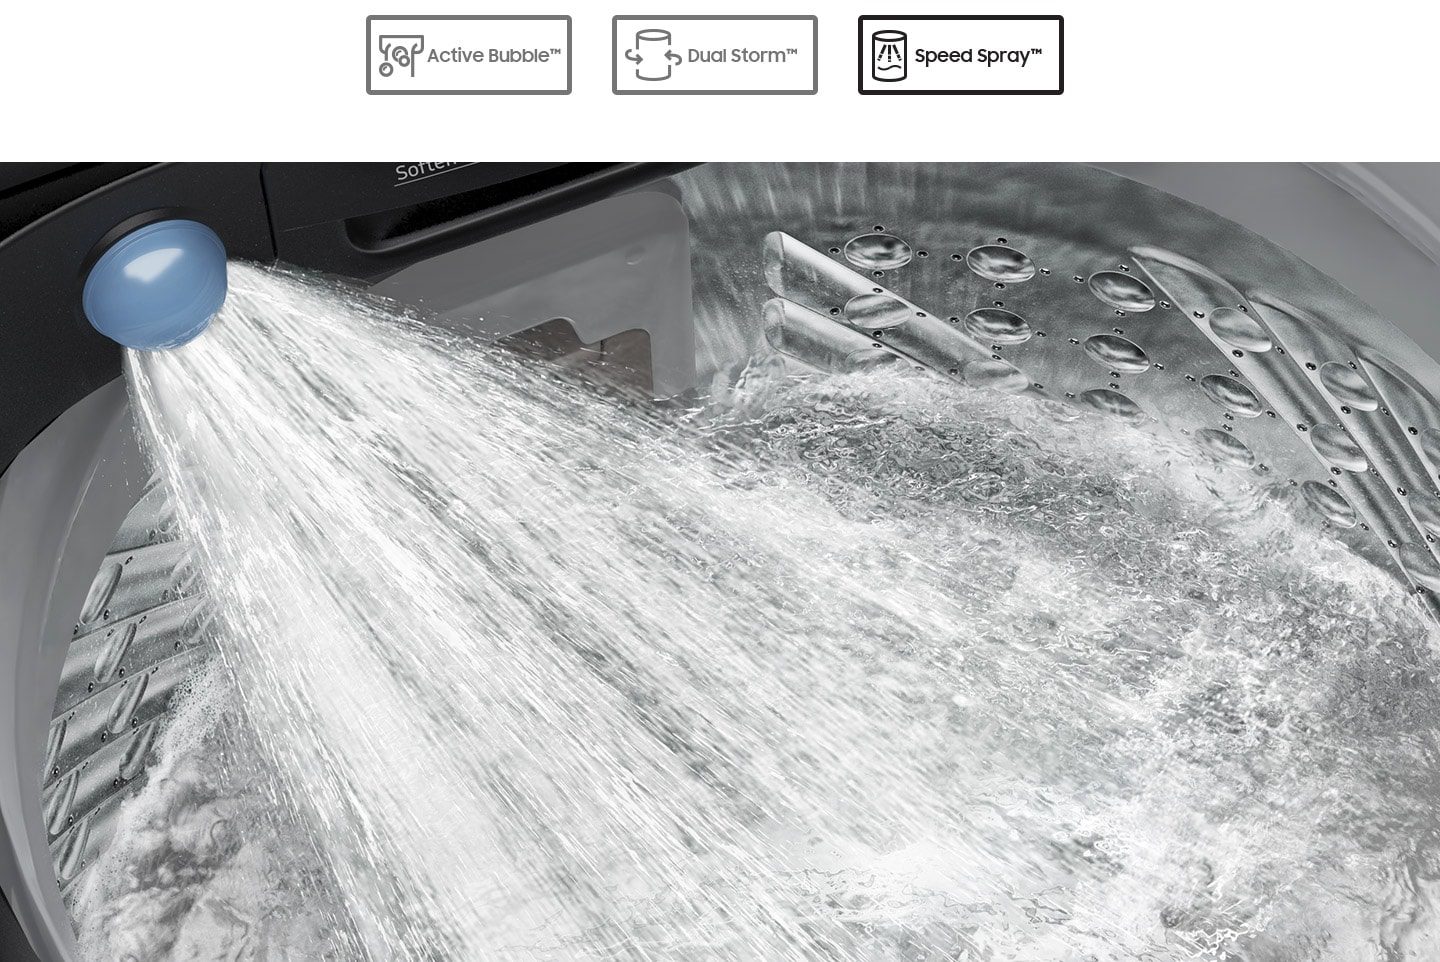 SpeedSpray function of which Jet shot water spurting out helps rinsing the laundry faster.